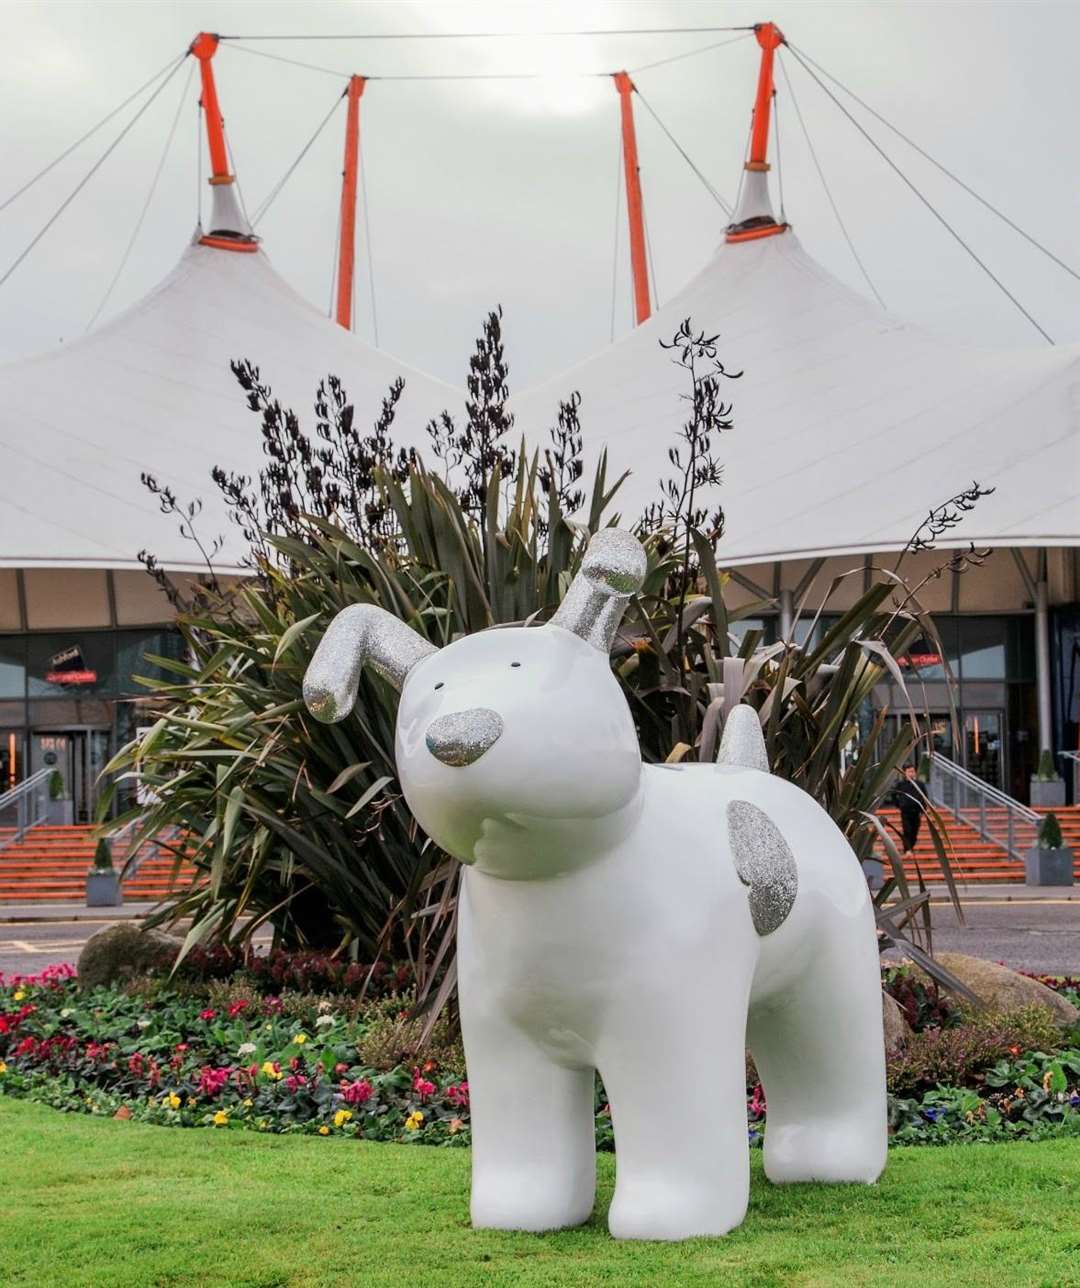 The Ashford Snowdogs trail marks the 40th anniversary this year of the Raymond Briggs classic